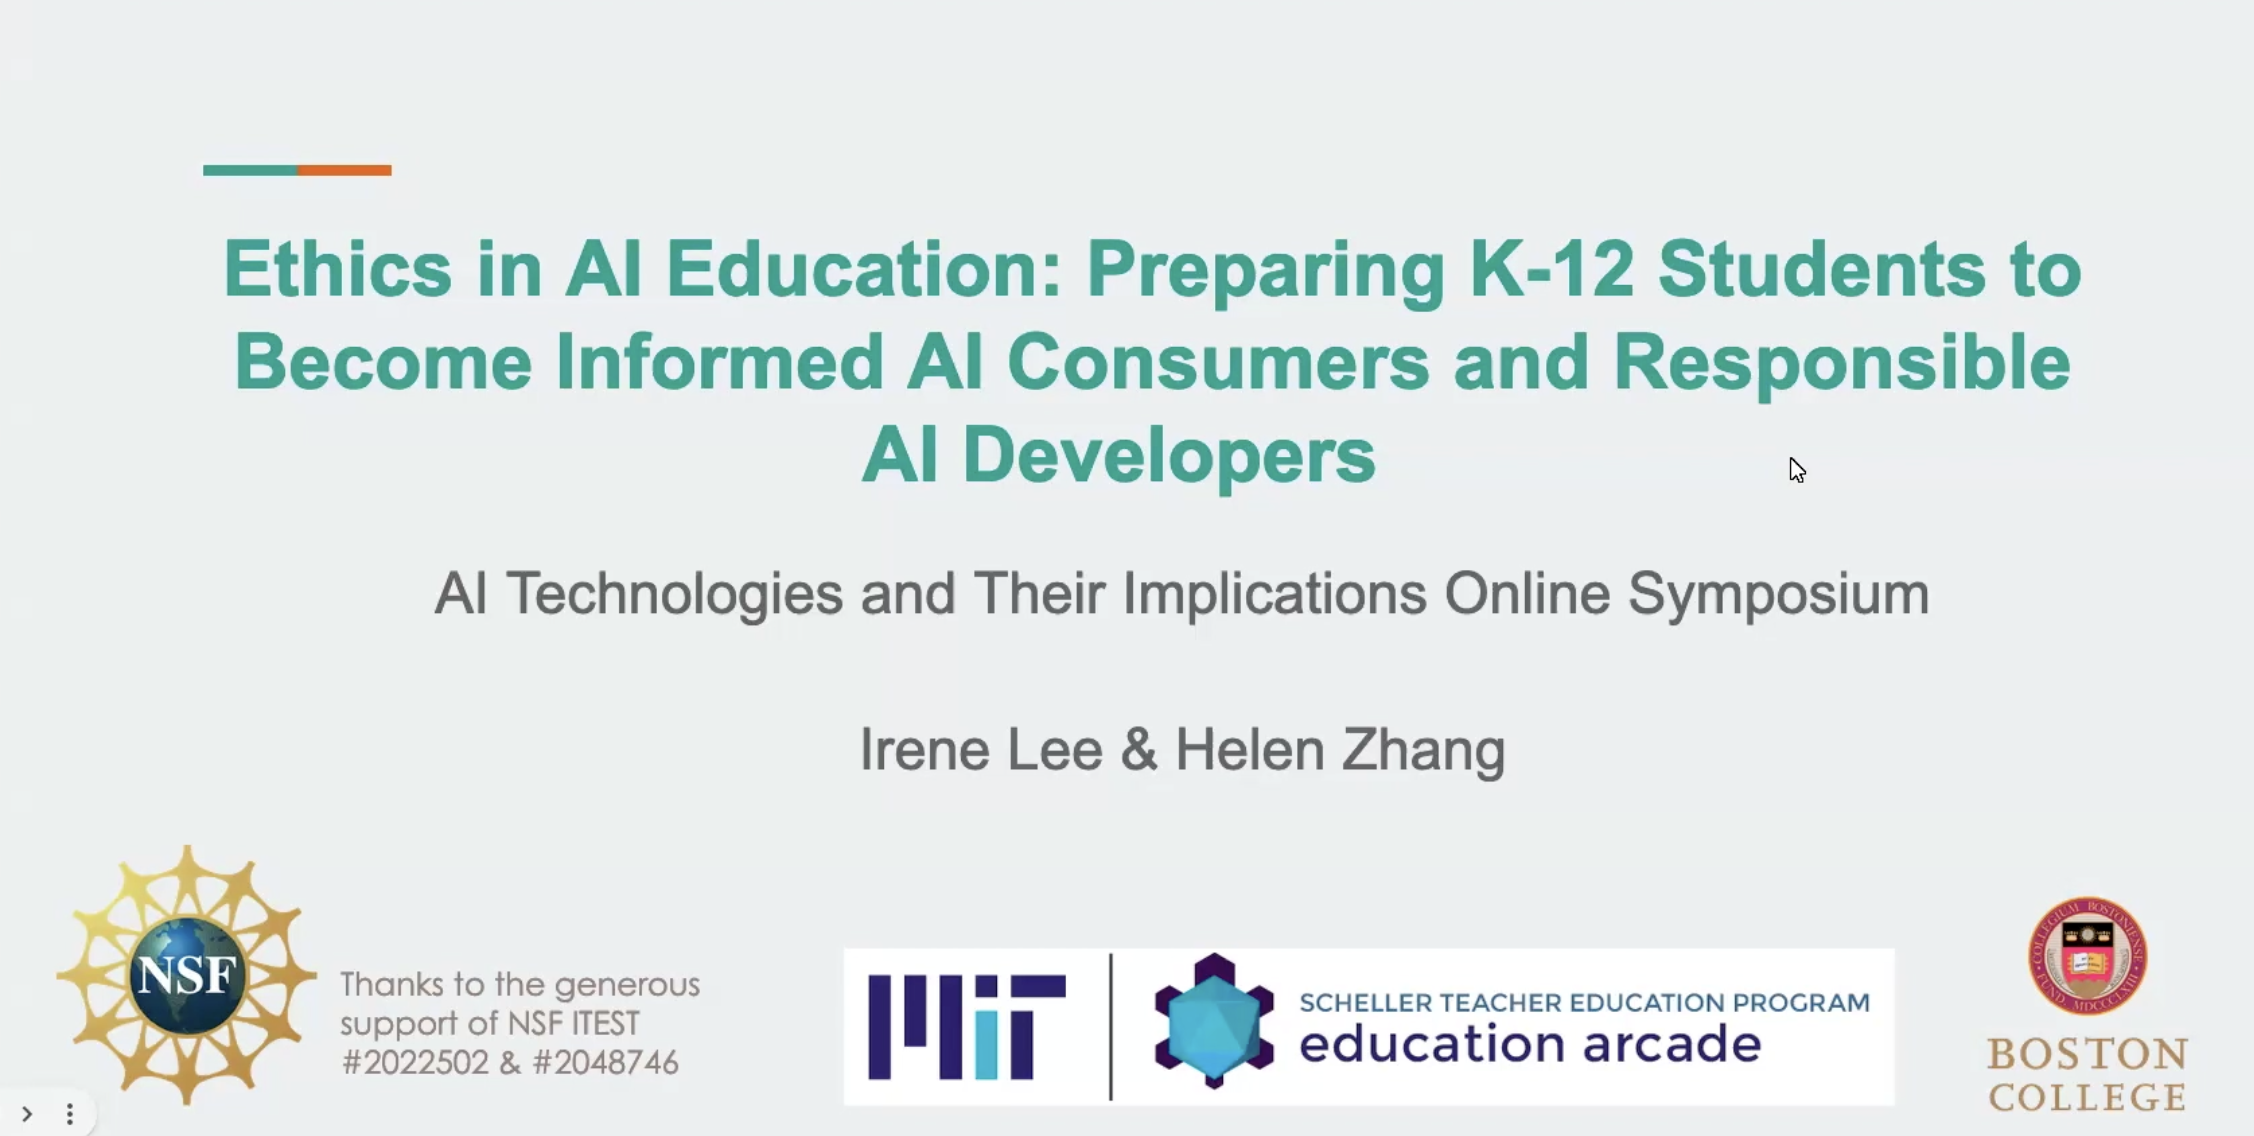 Symposium on AI Technologies and Their Implications: Ethics in AI Education